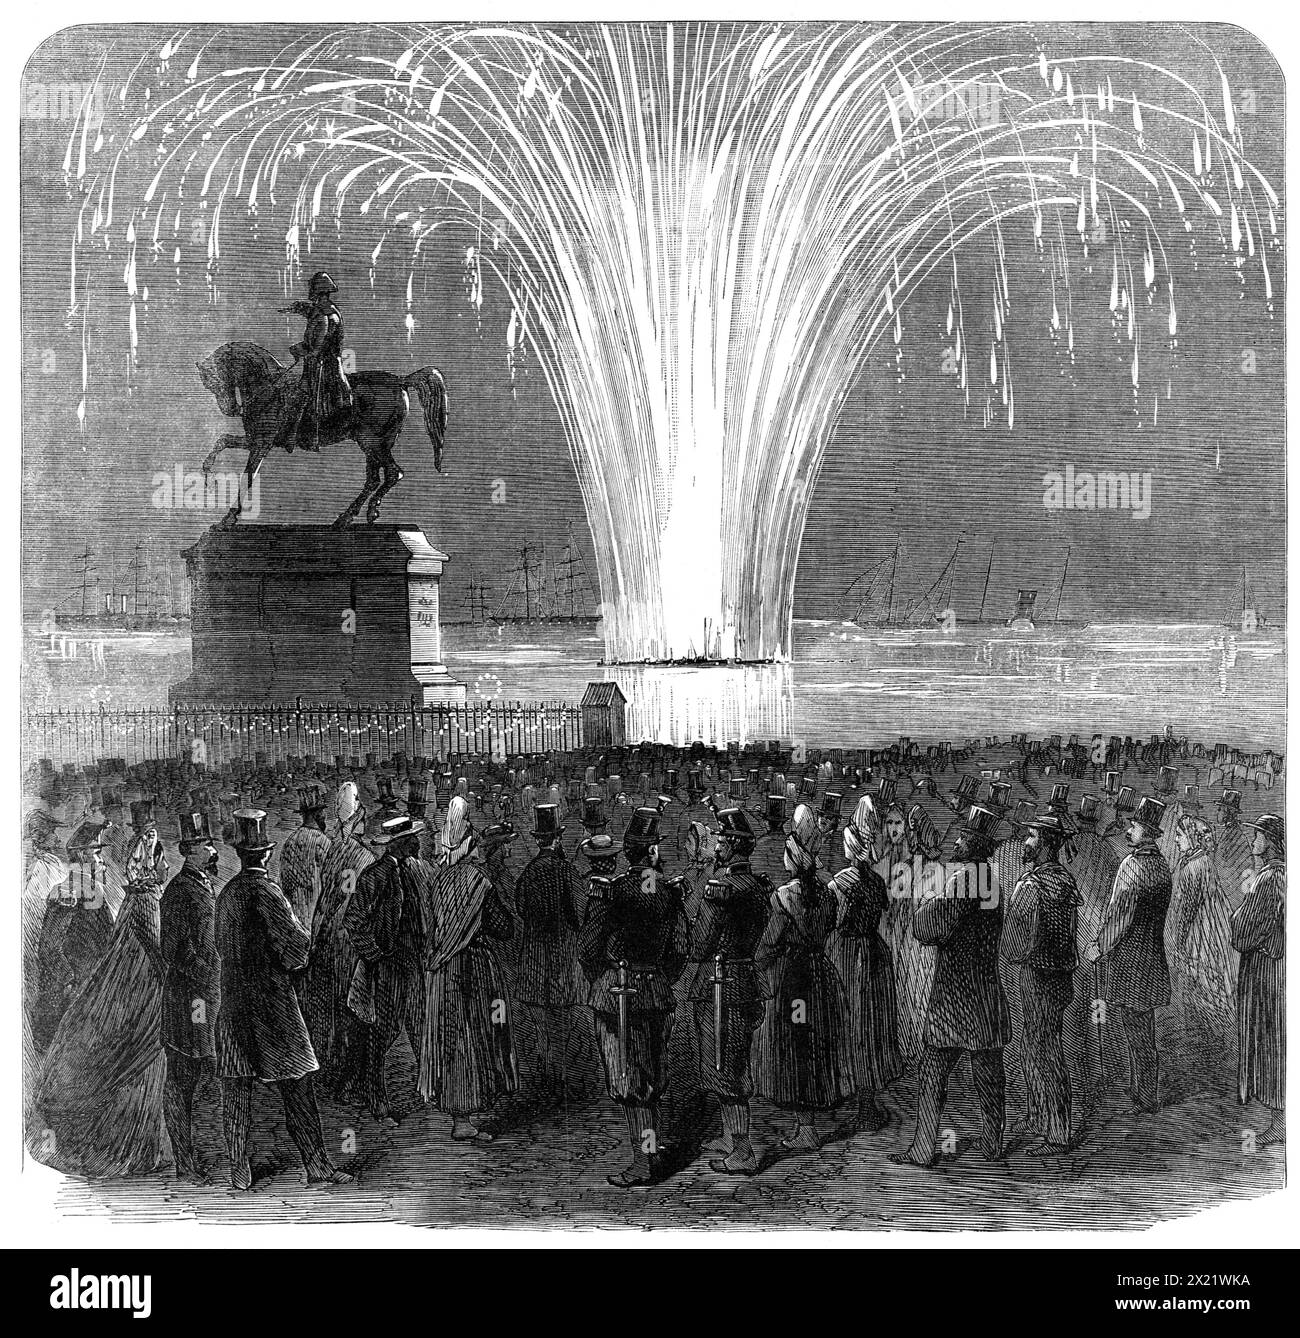 Display of fireworks, Inner Harbour, Cherbourg, in honour of the British Channel Squadron, 1865. 'In the evening there was a brilliant display of fireworks from the French vessels in the inner harbour...our Illustration gives a view of this scene, as beheld from the Place Napoleon, near the equestrian Statue of the first Emperor'. From &quot;Illustrated London News&quot;, 1865. Stock Photo